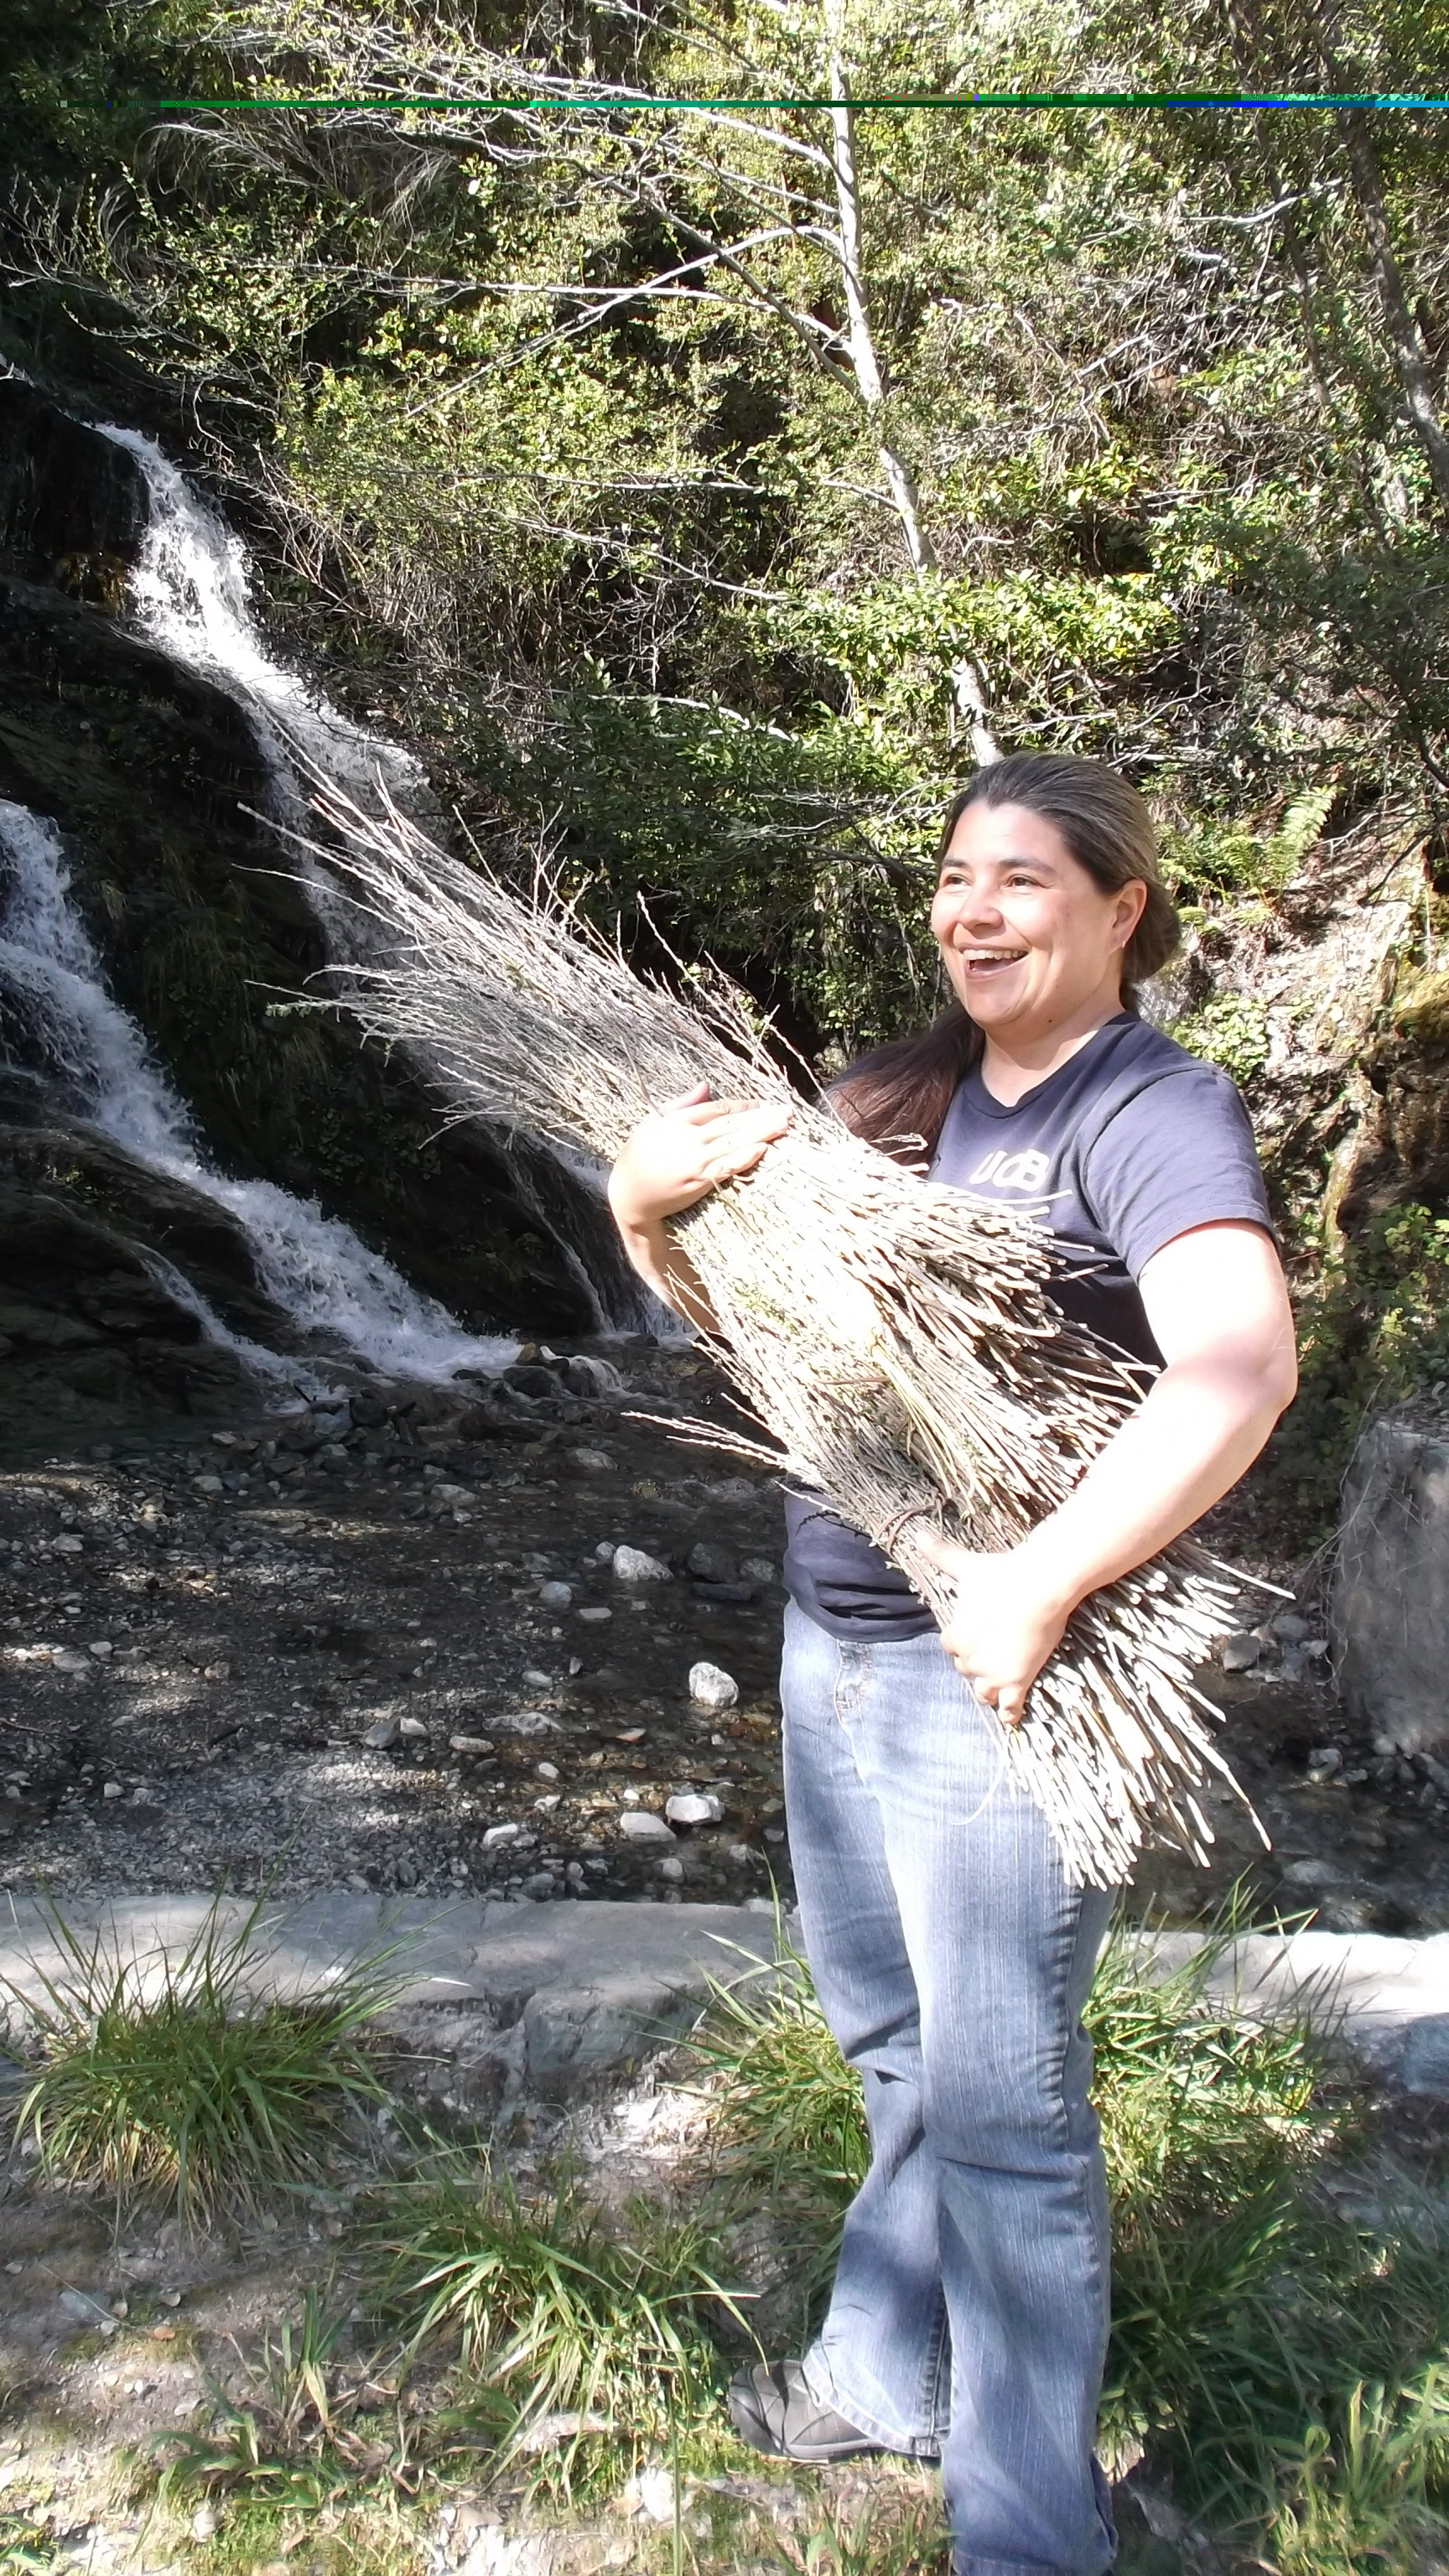 Carolyn Smith holds an armful of dry sticks, standing in front of a waterfall